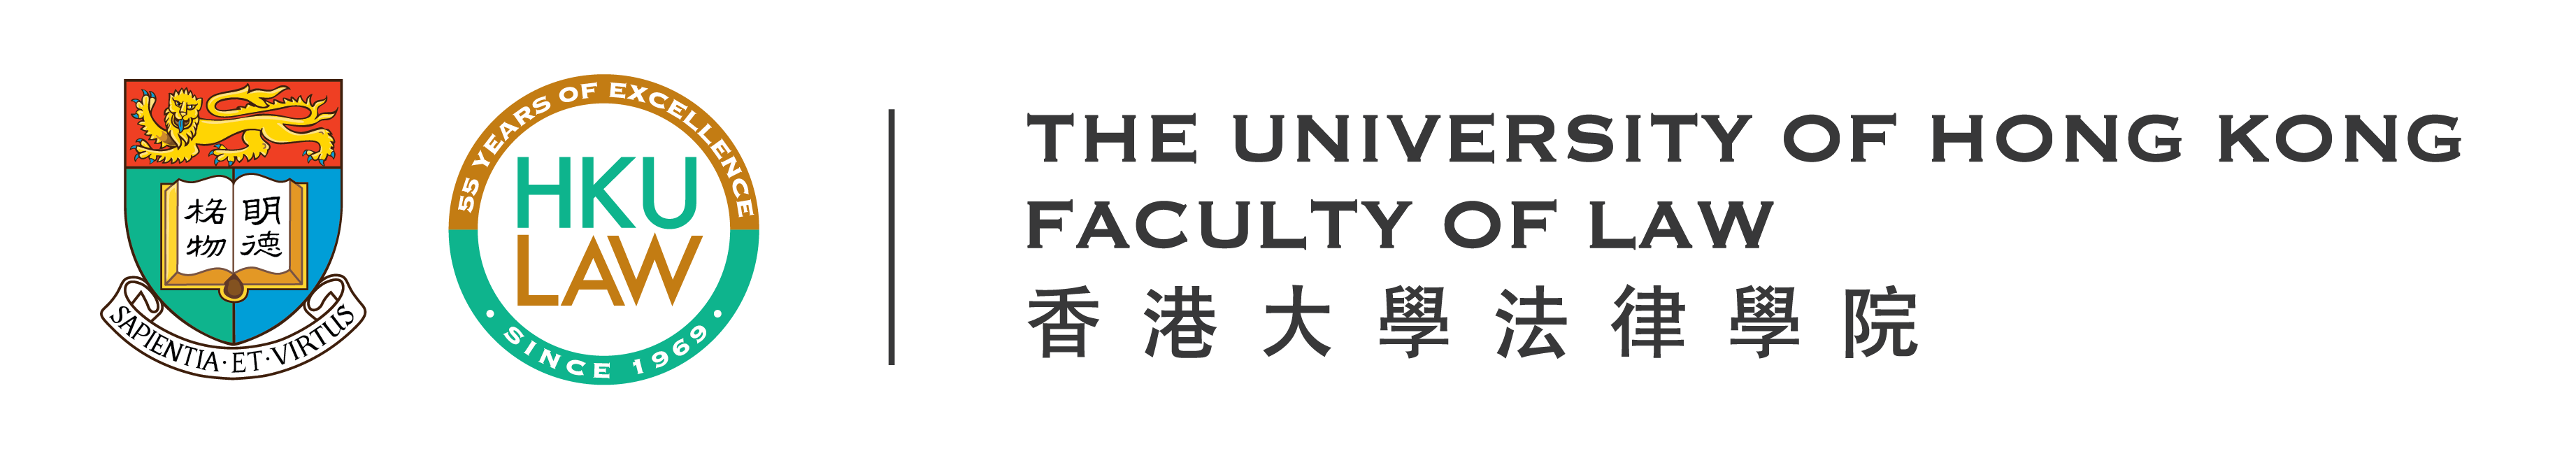 HKU FACULTY OF LAW E-NEWSLETTER